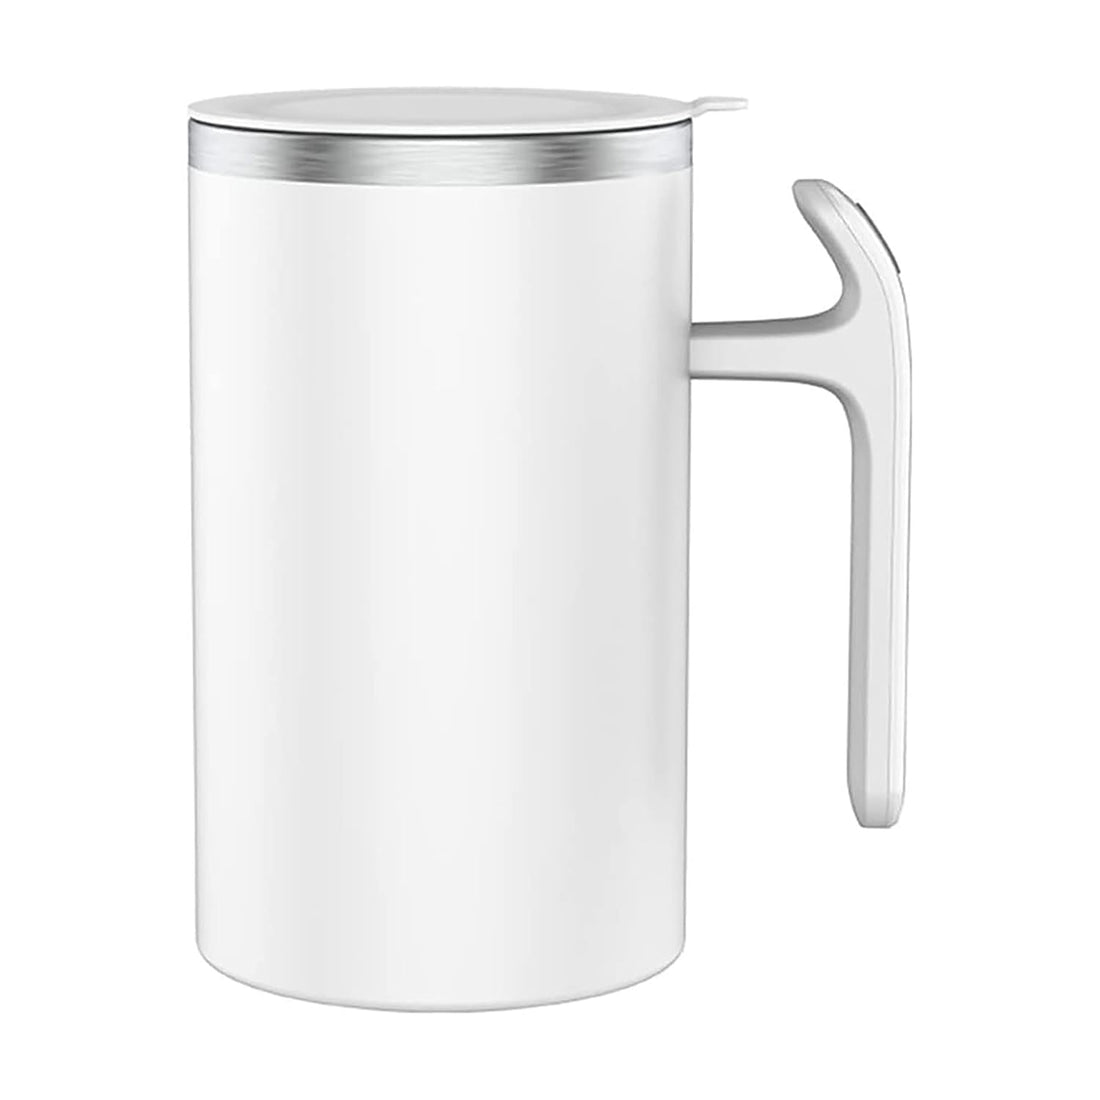 FANSAISI Automatic Stirring Coffee Mug, Self Mixing Stainless Steel Cup for Milk Beverage Chocolate (White)